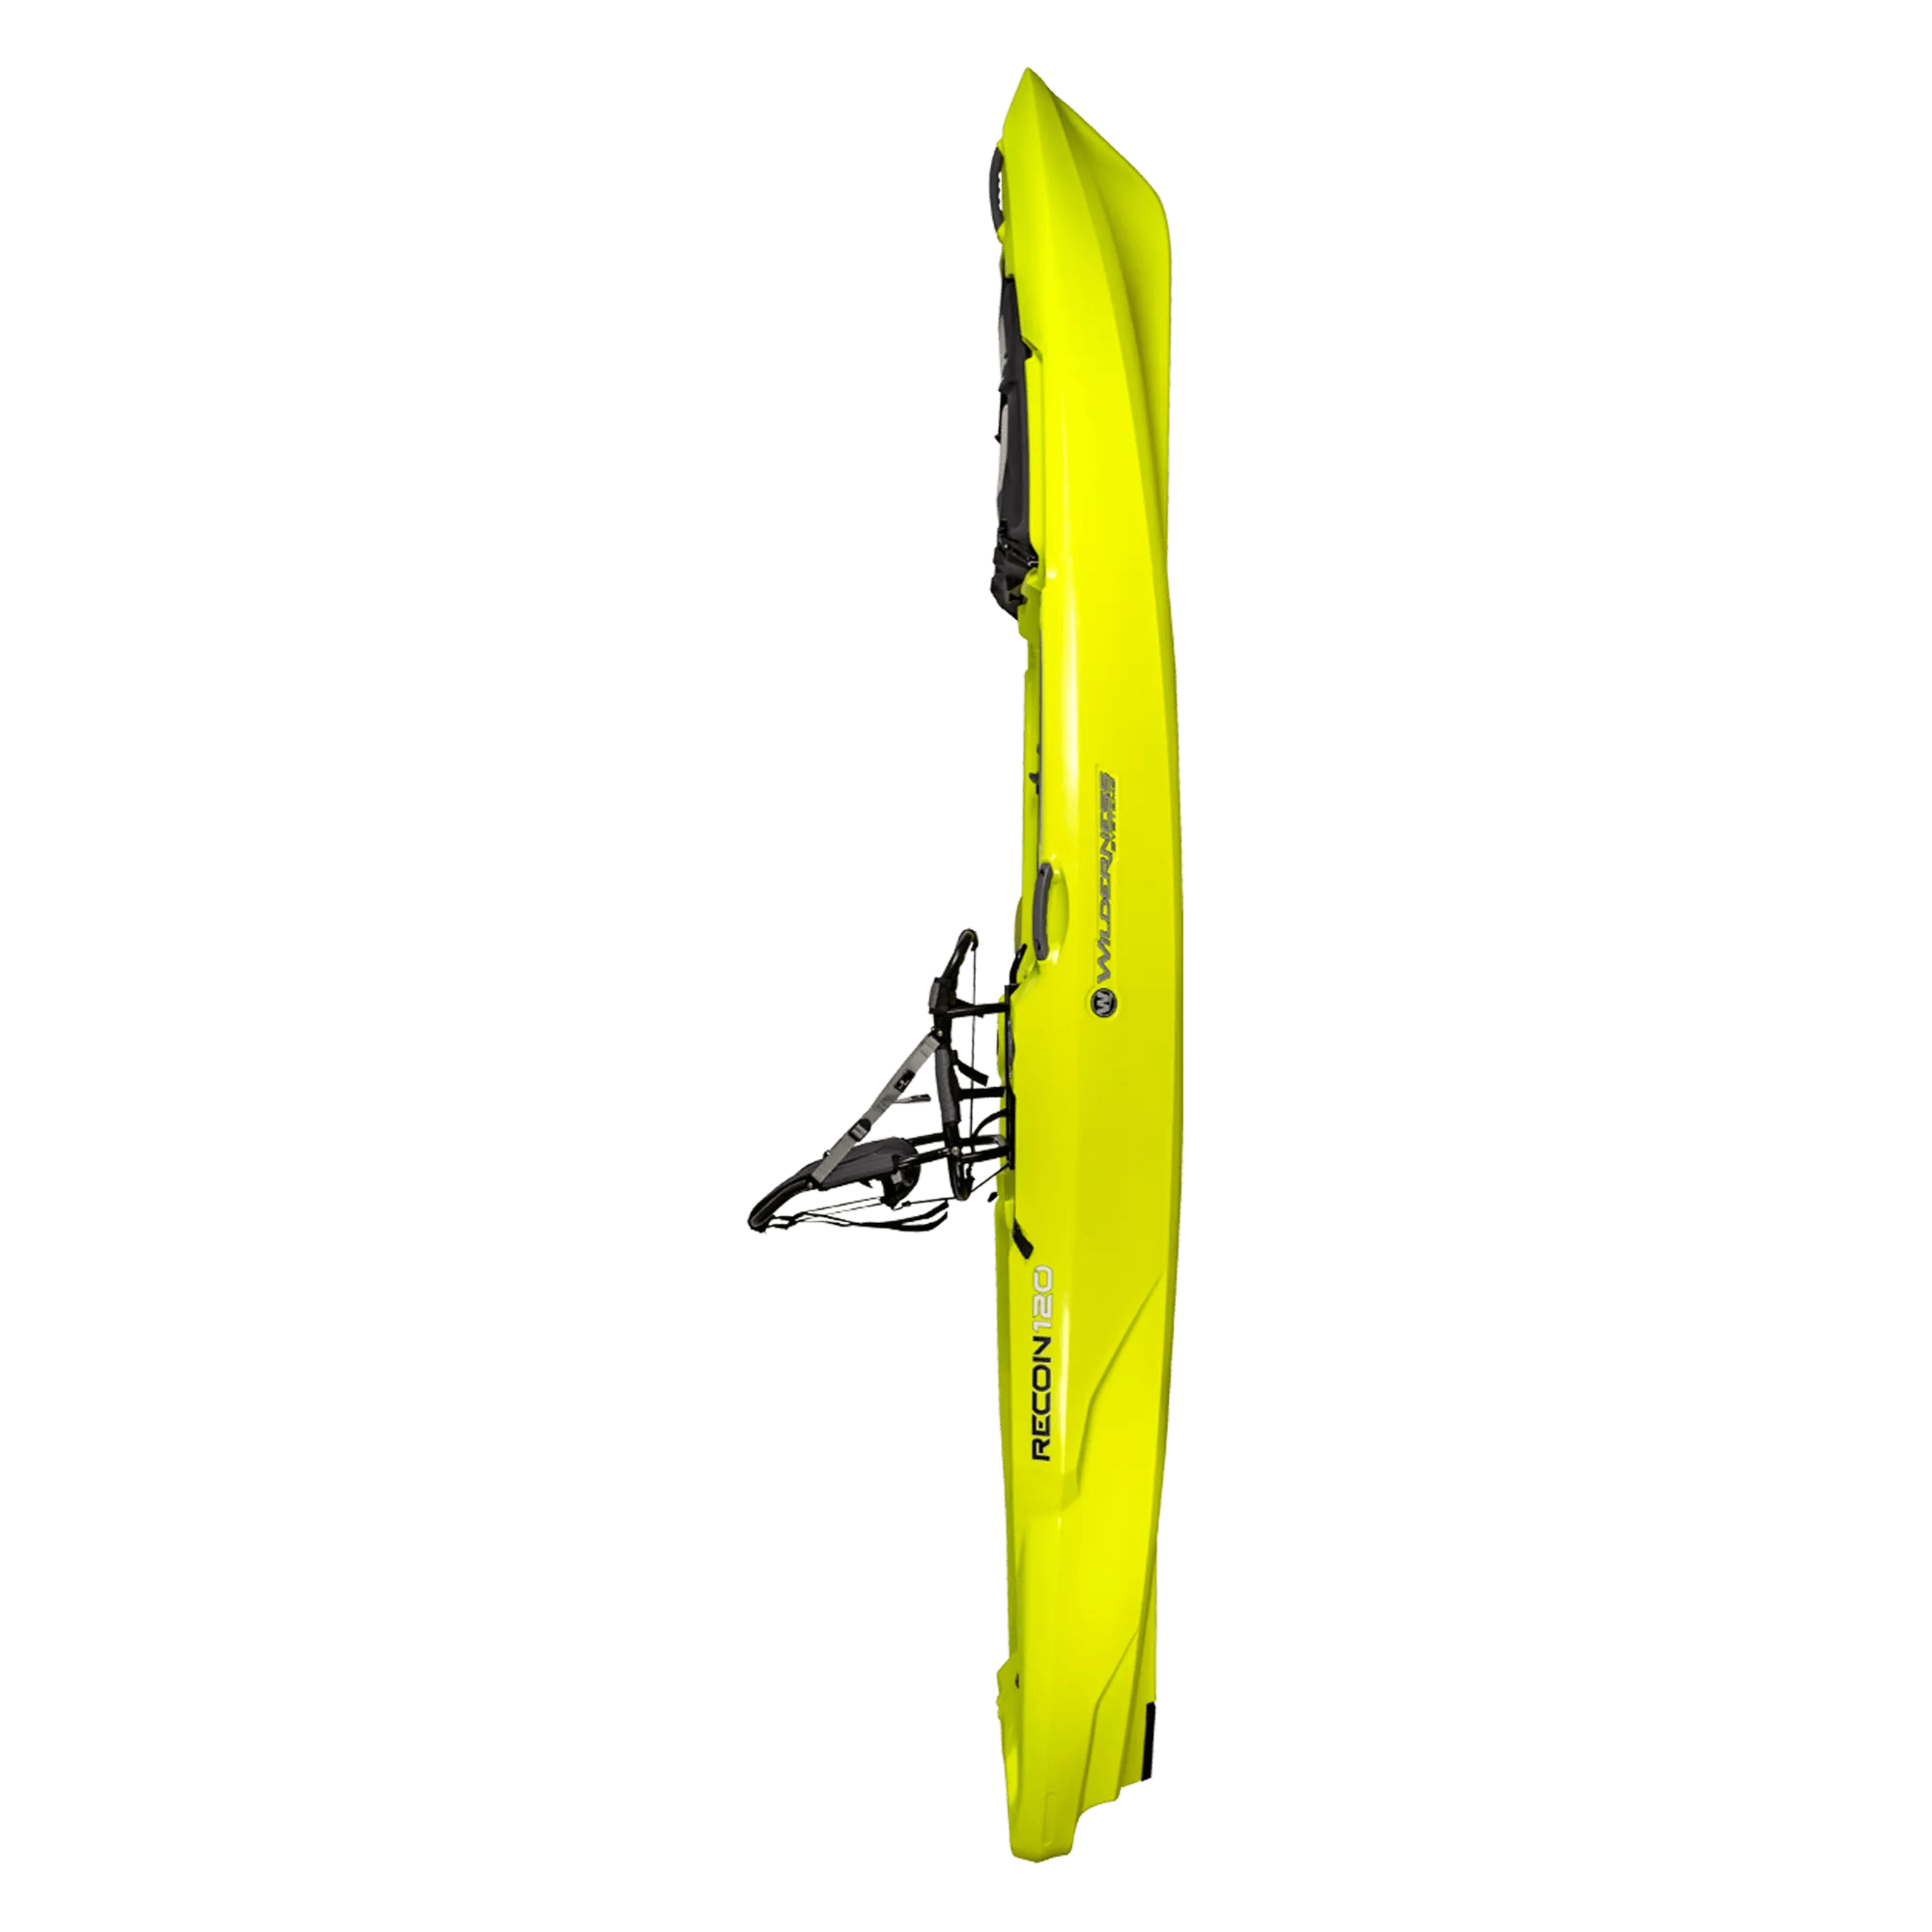 WILDERNESS SYSTEMS - Recon 120 Fishing Kayak - Discontinued color/model - Yellow - 9751100180 - SIDE